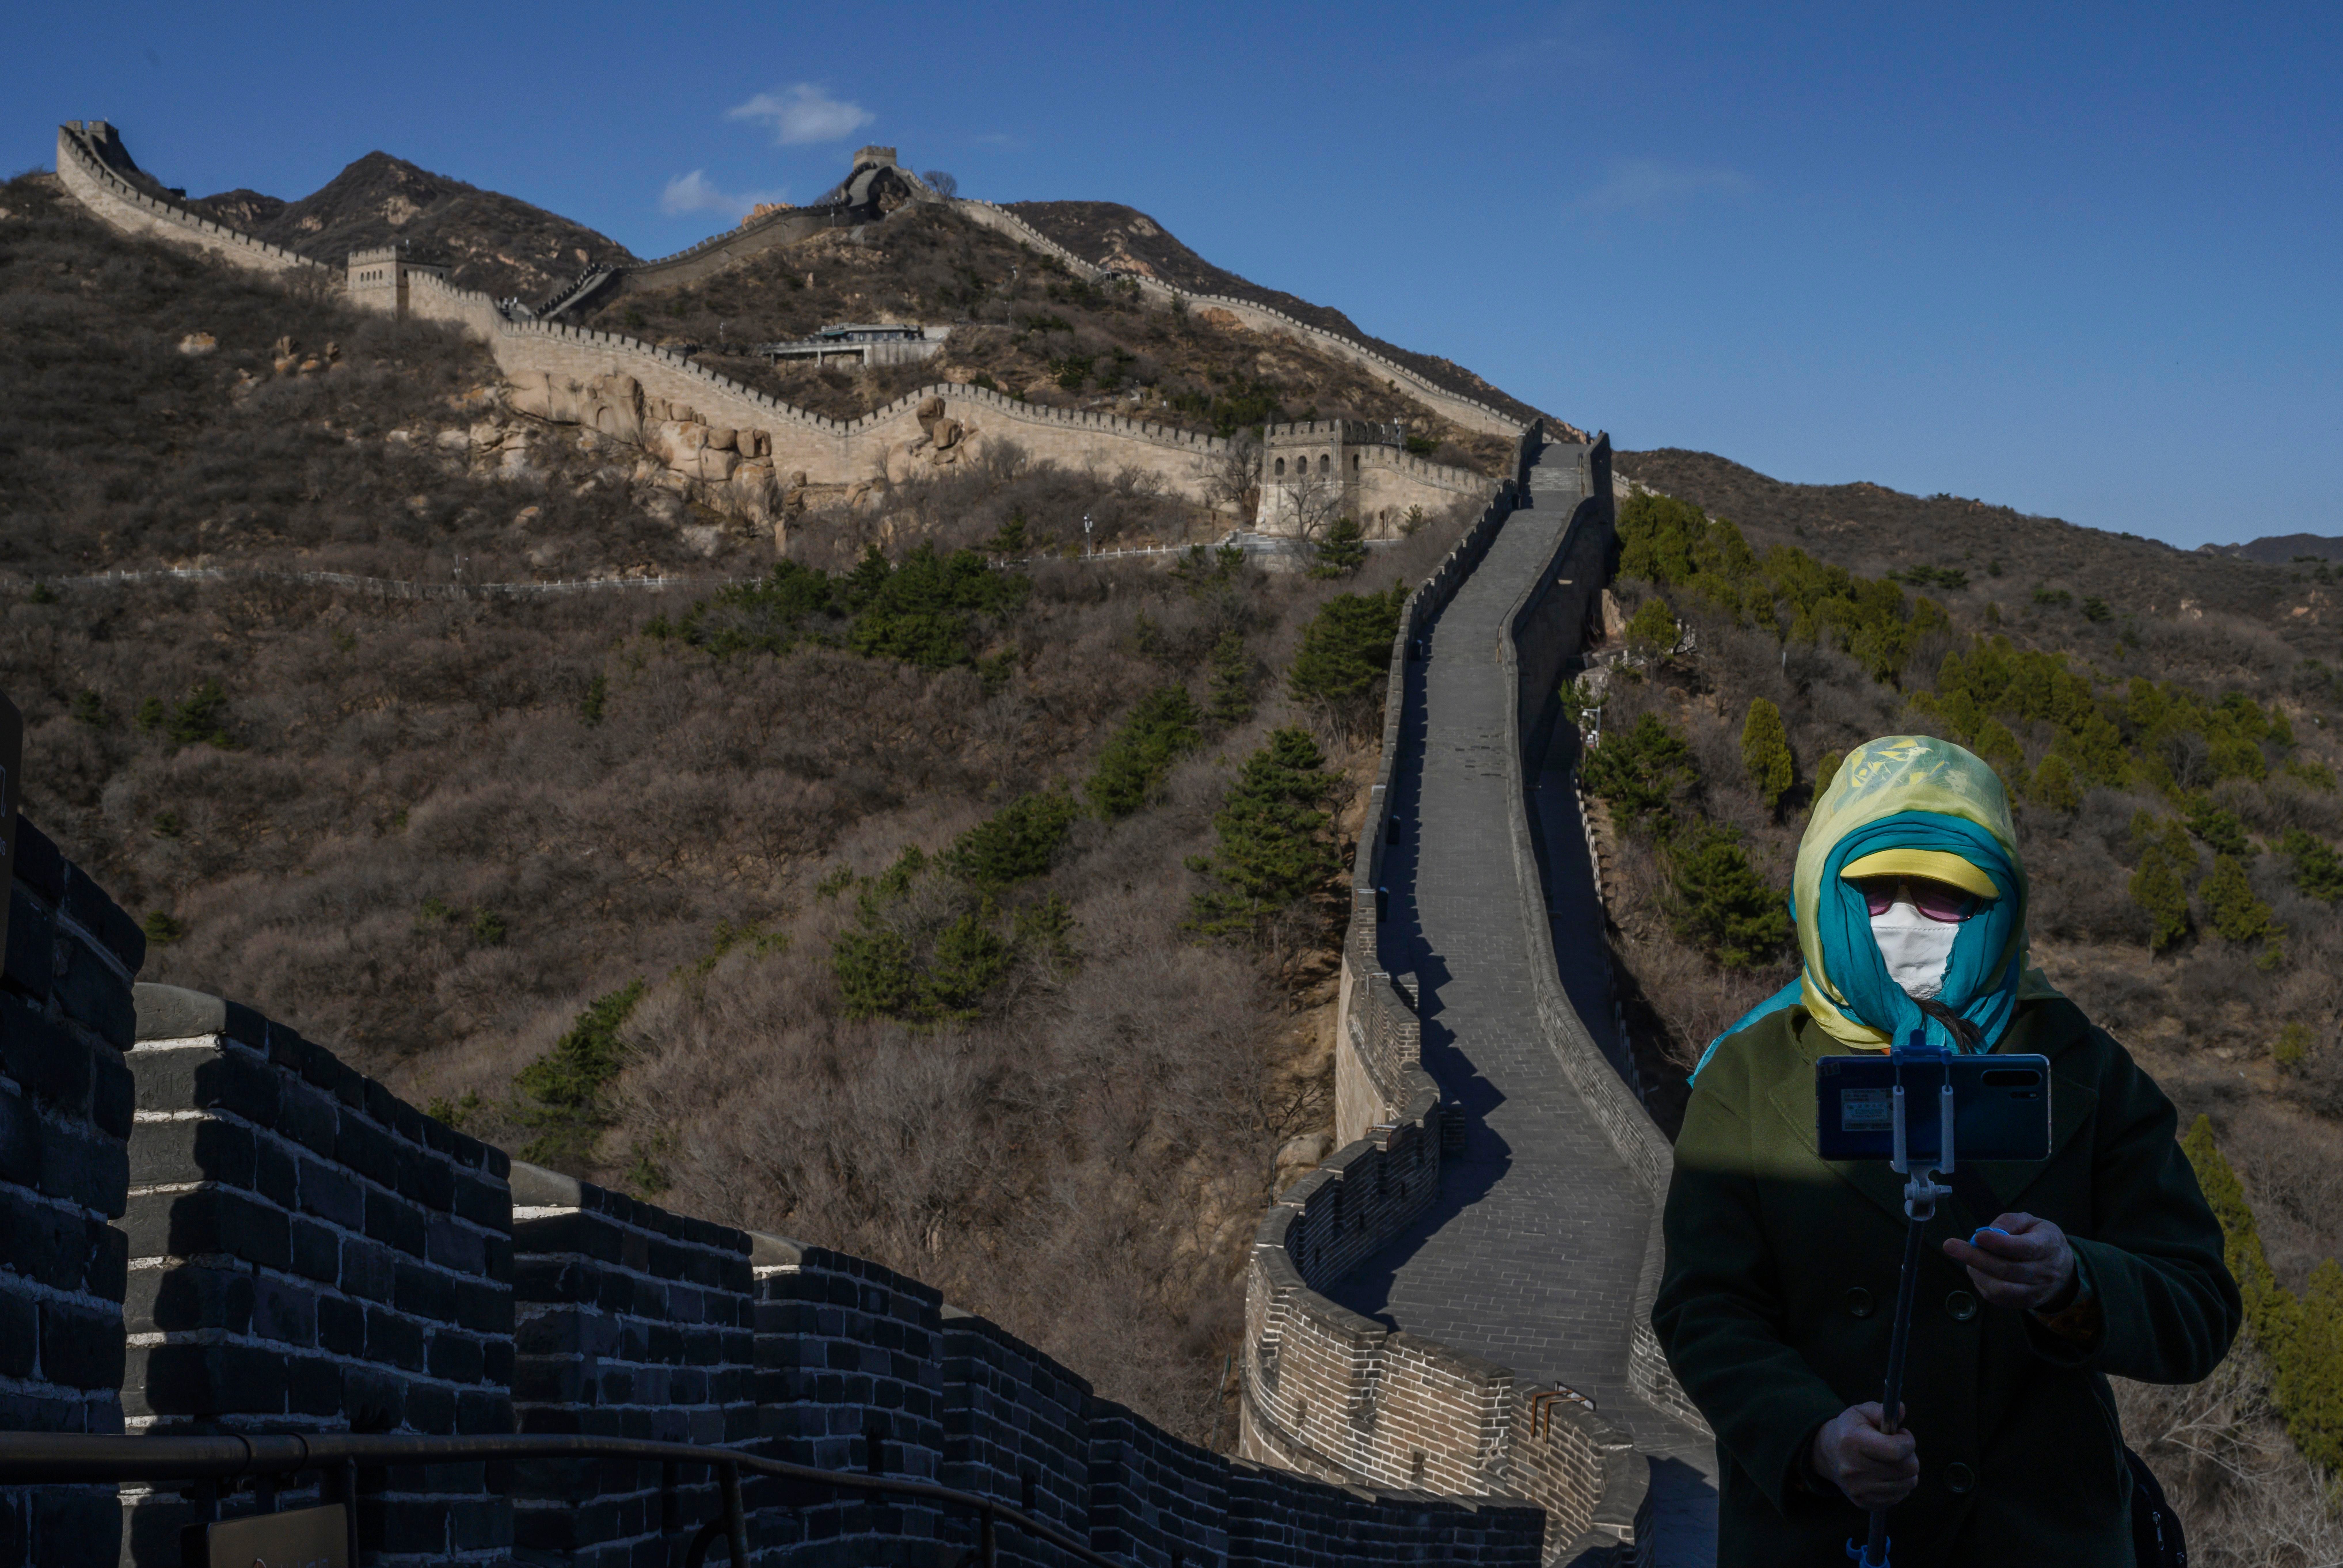 Yin Xiaotian faces backlash for video dancing on Great Wall of